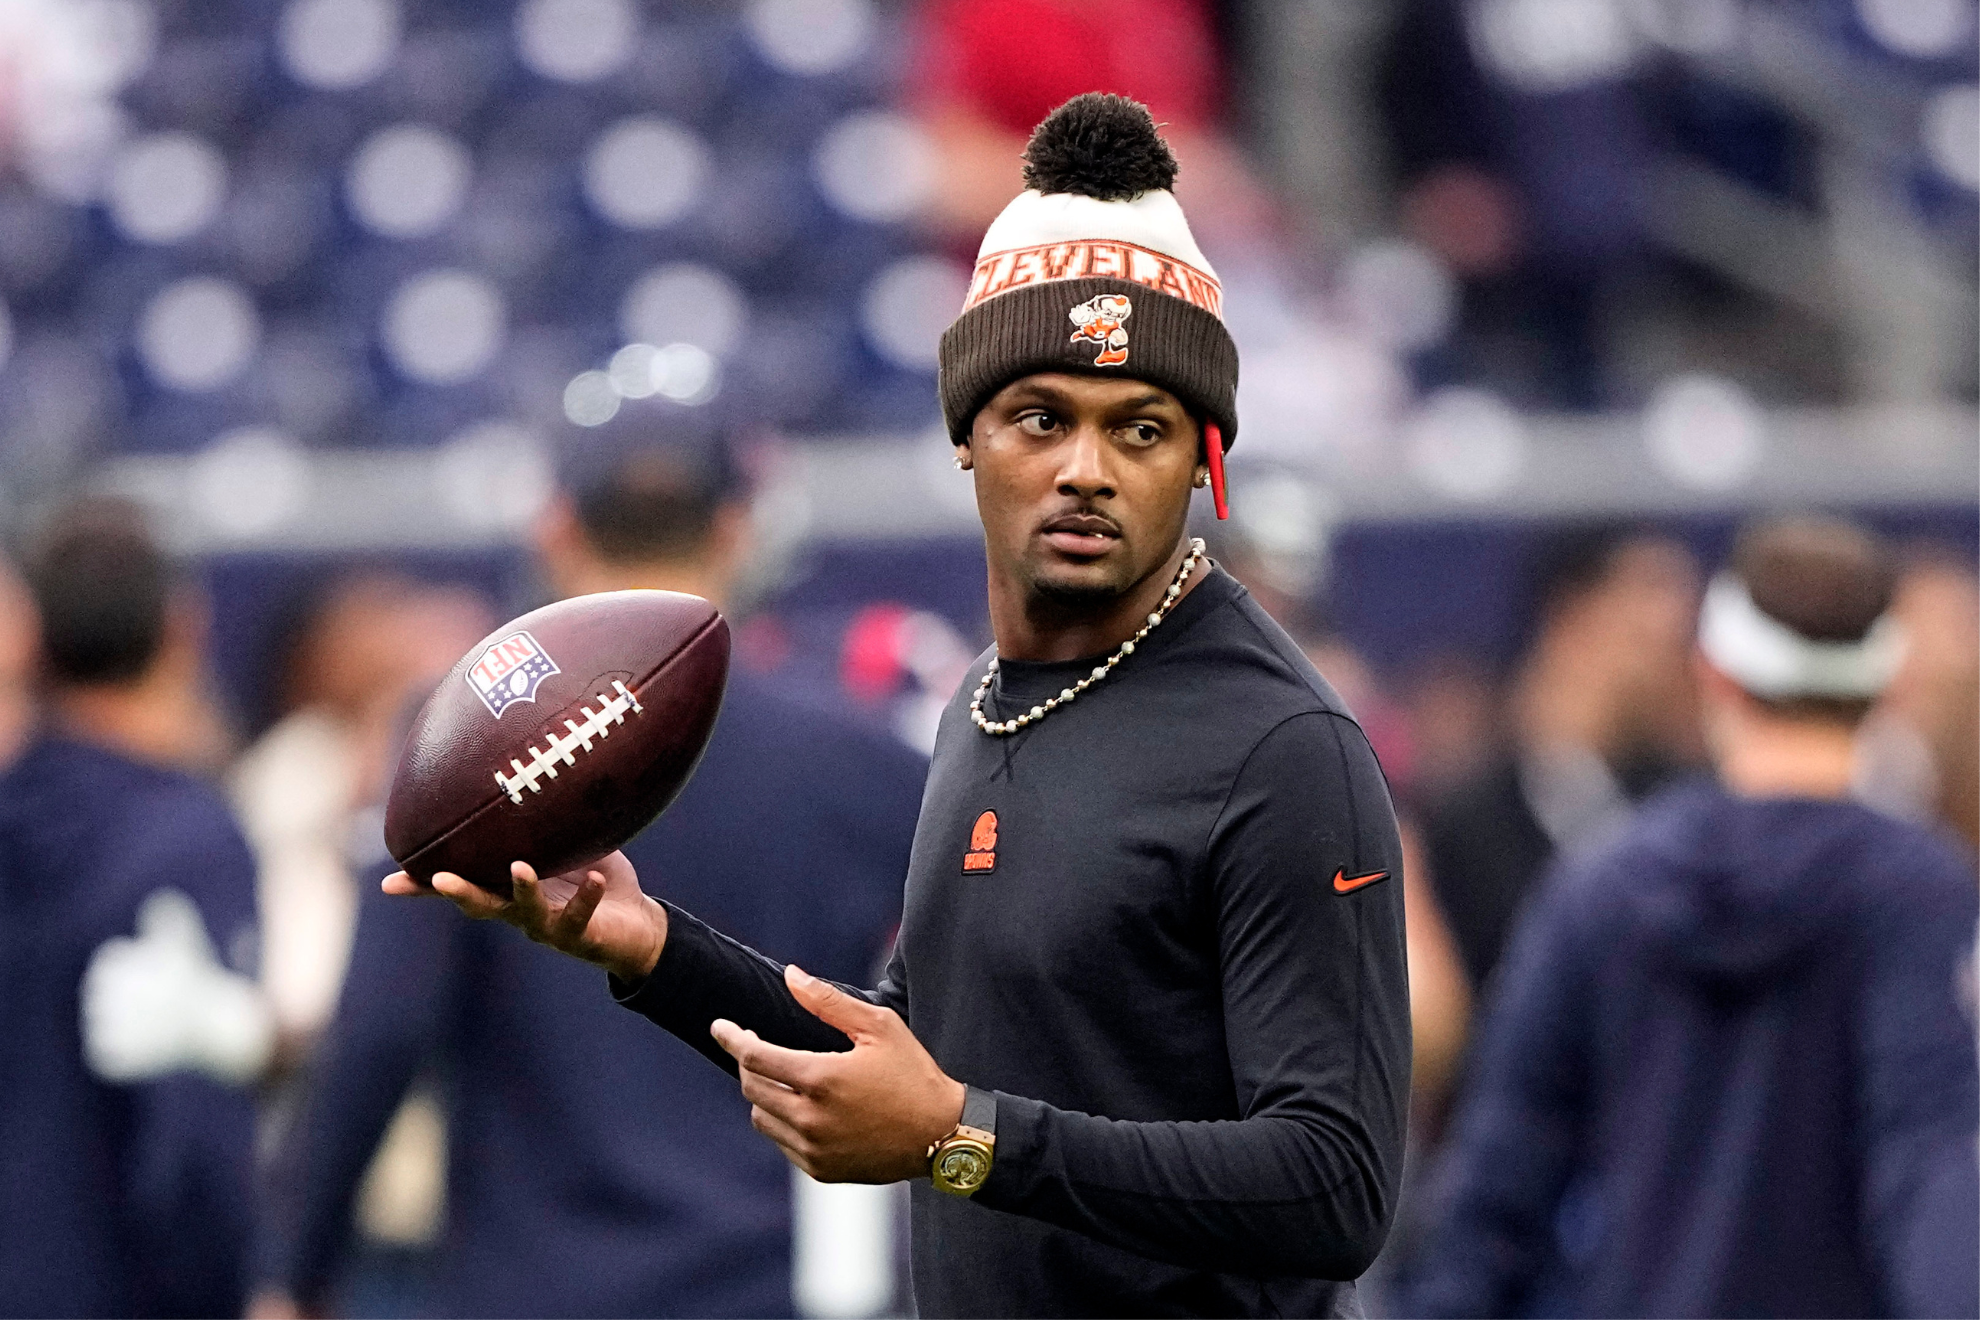 Watson has made only 12 starts since the Browns signed him to a fully-guaranteed $230 million contract.